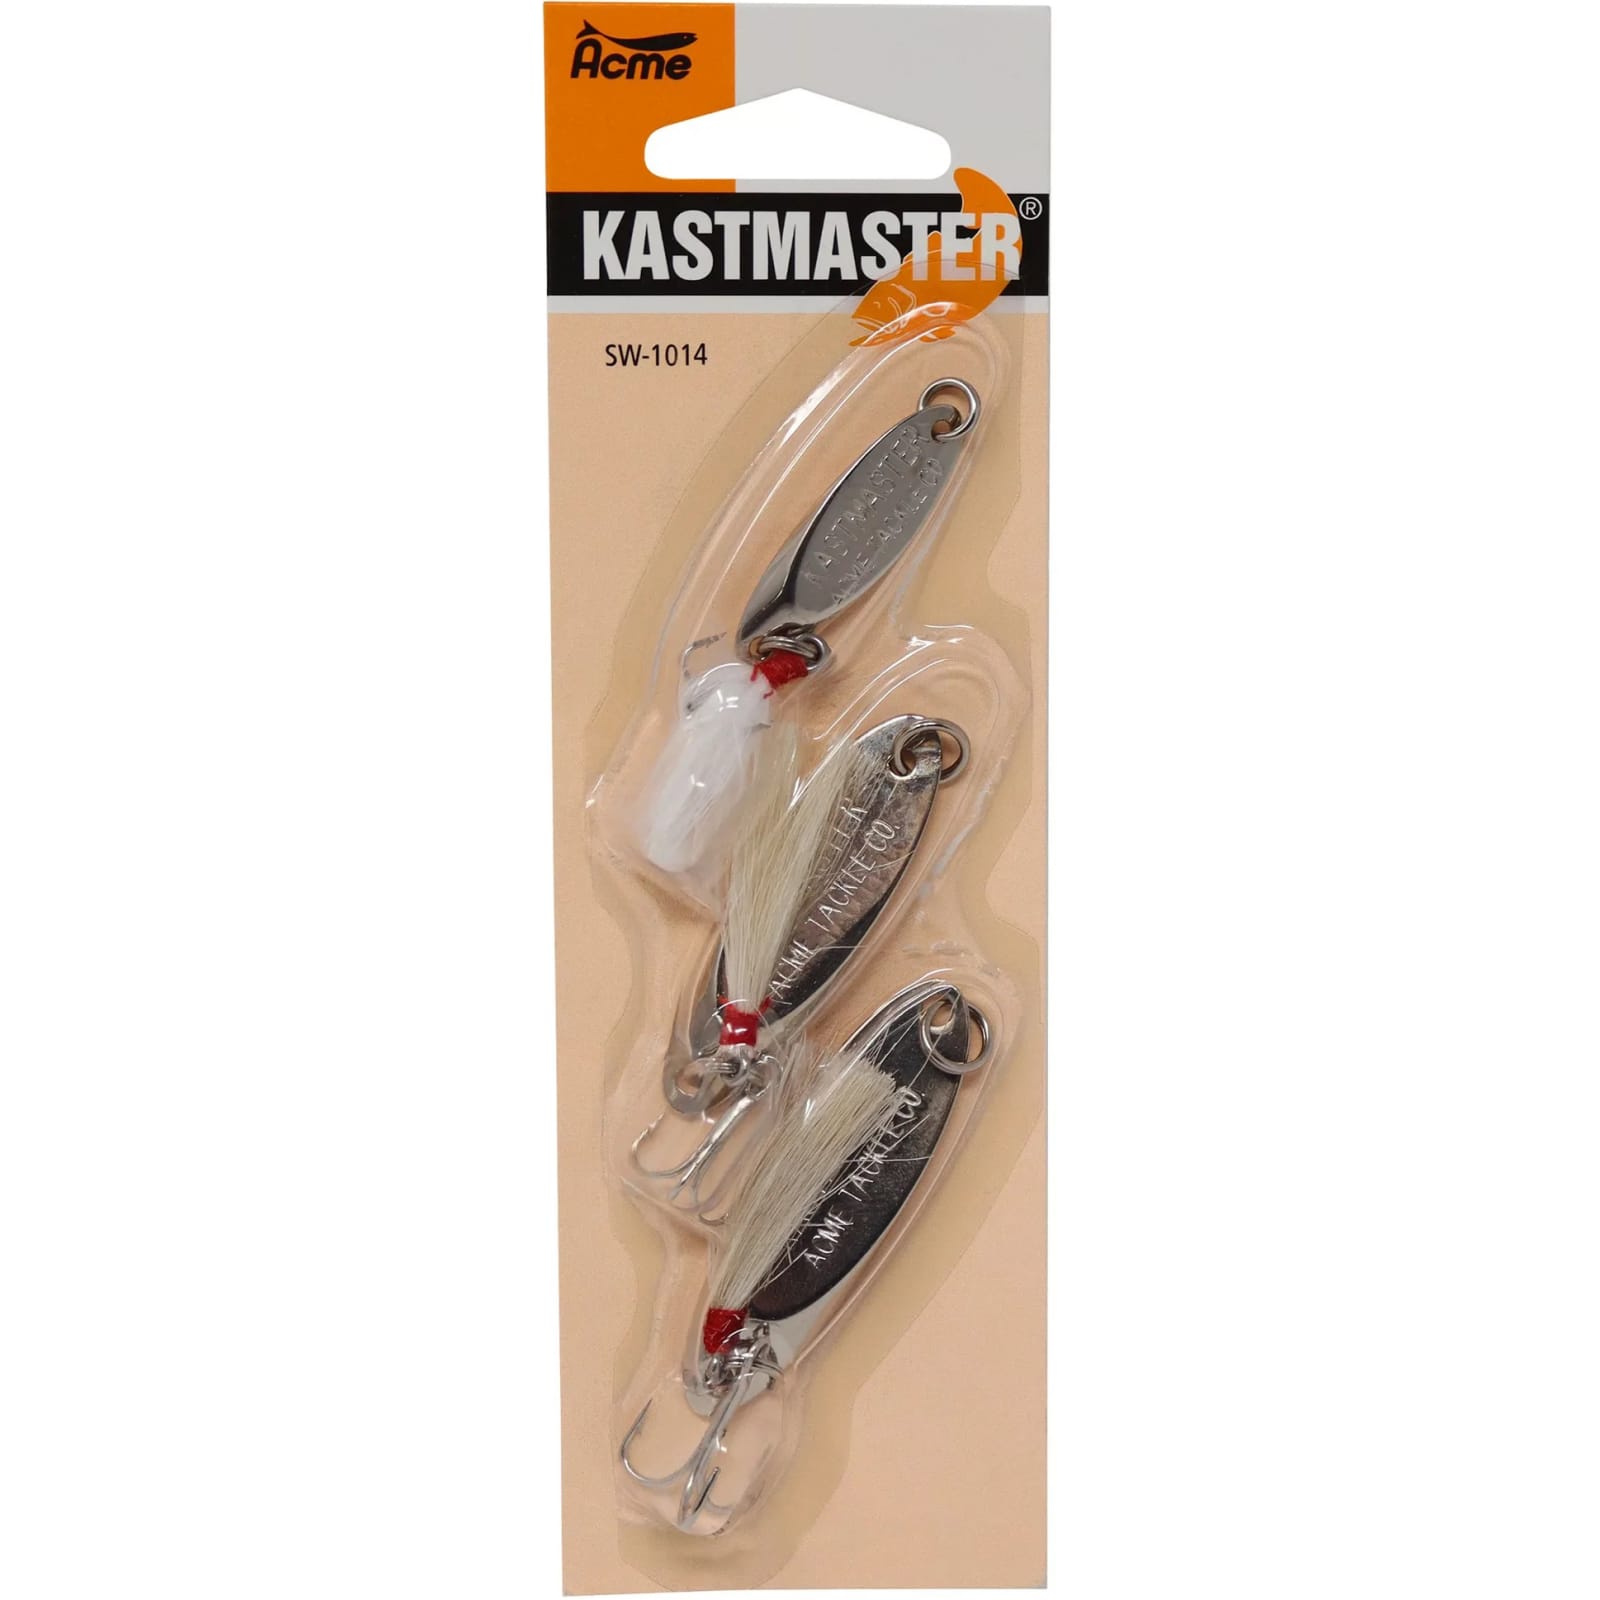 Kastmaster Chrome w/Bucktail Lure - 3 Pk. by Acme Tackle Company at Fleet  Farm